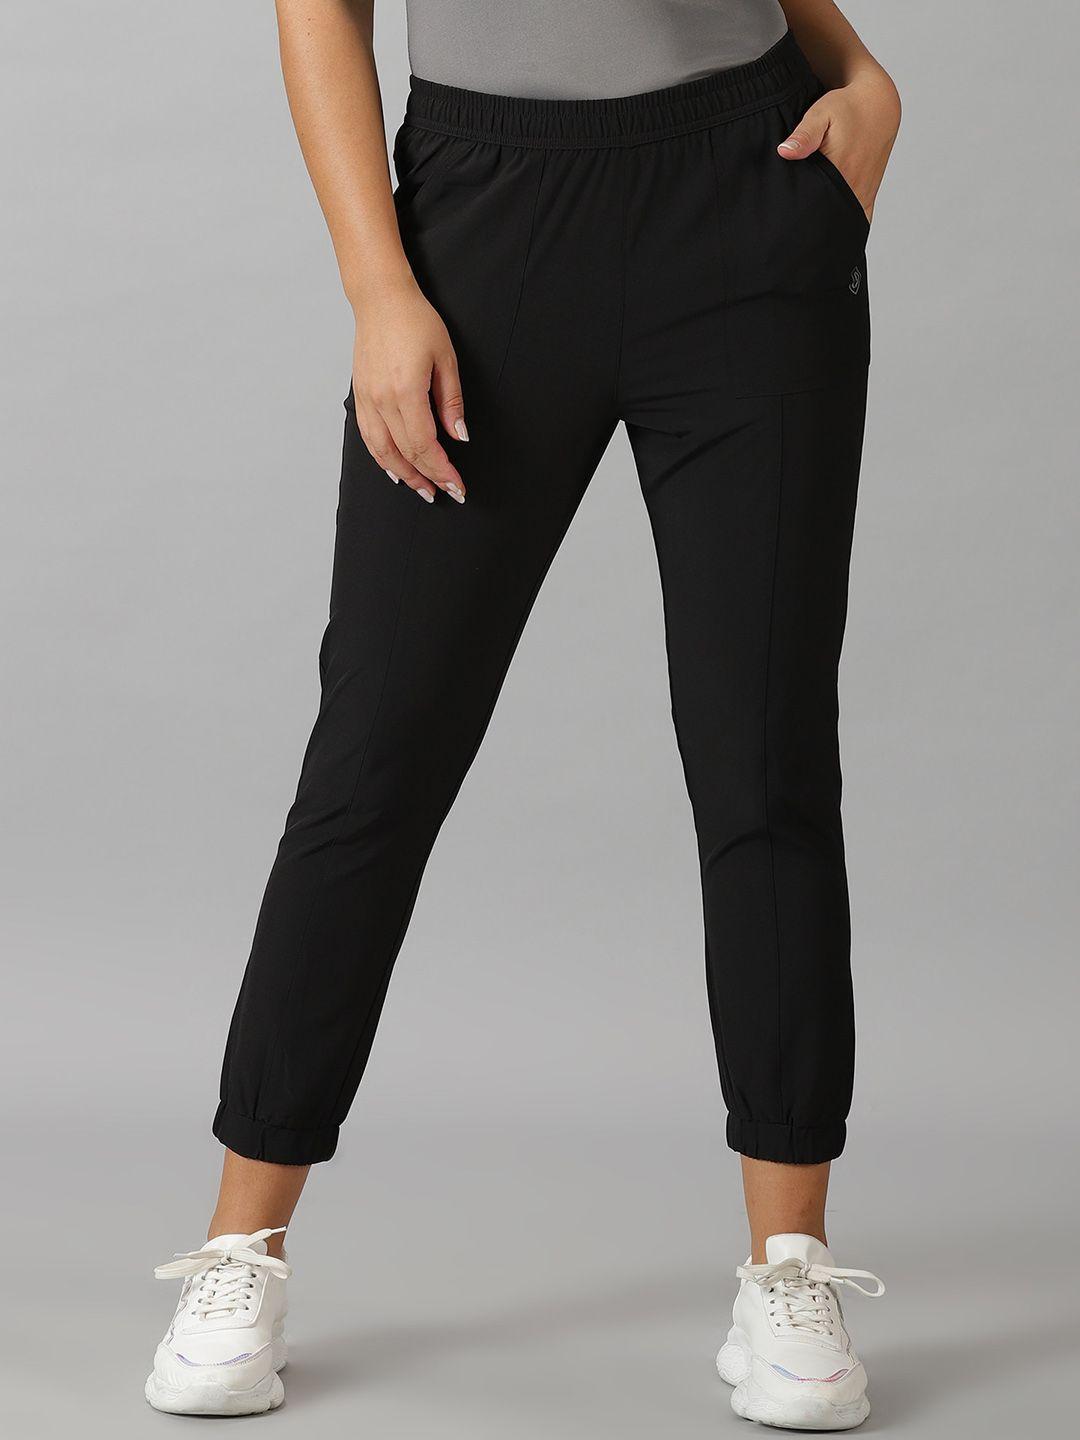 domin8 women mid-rise track pant